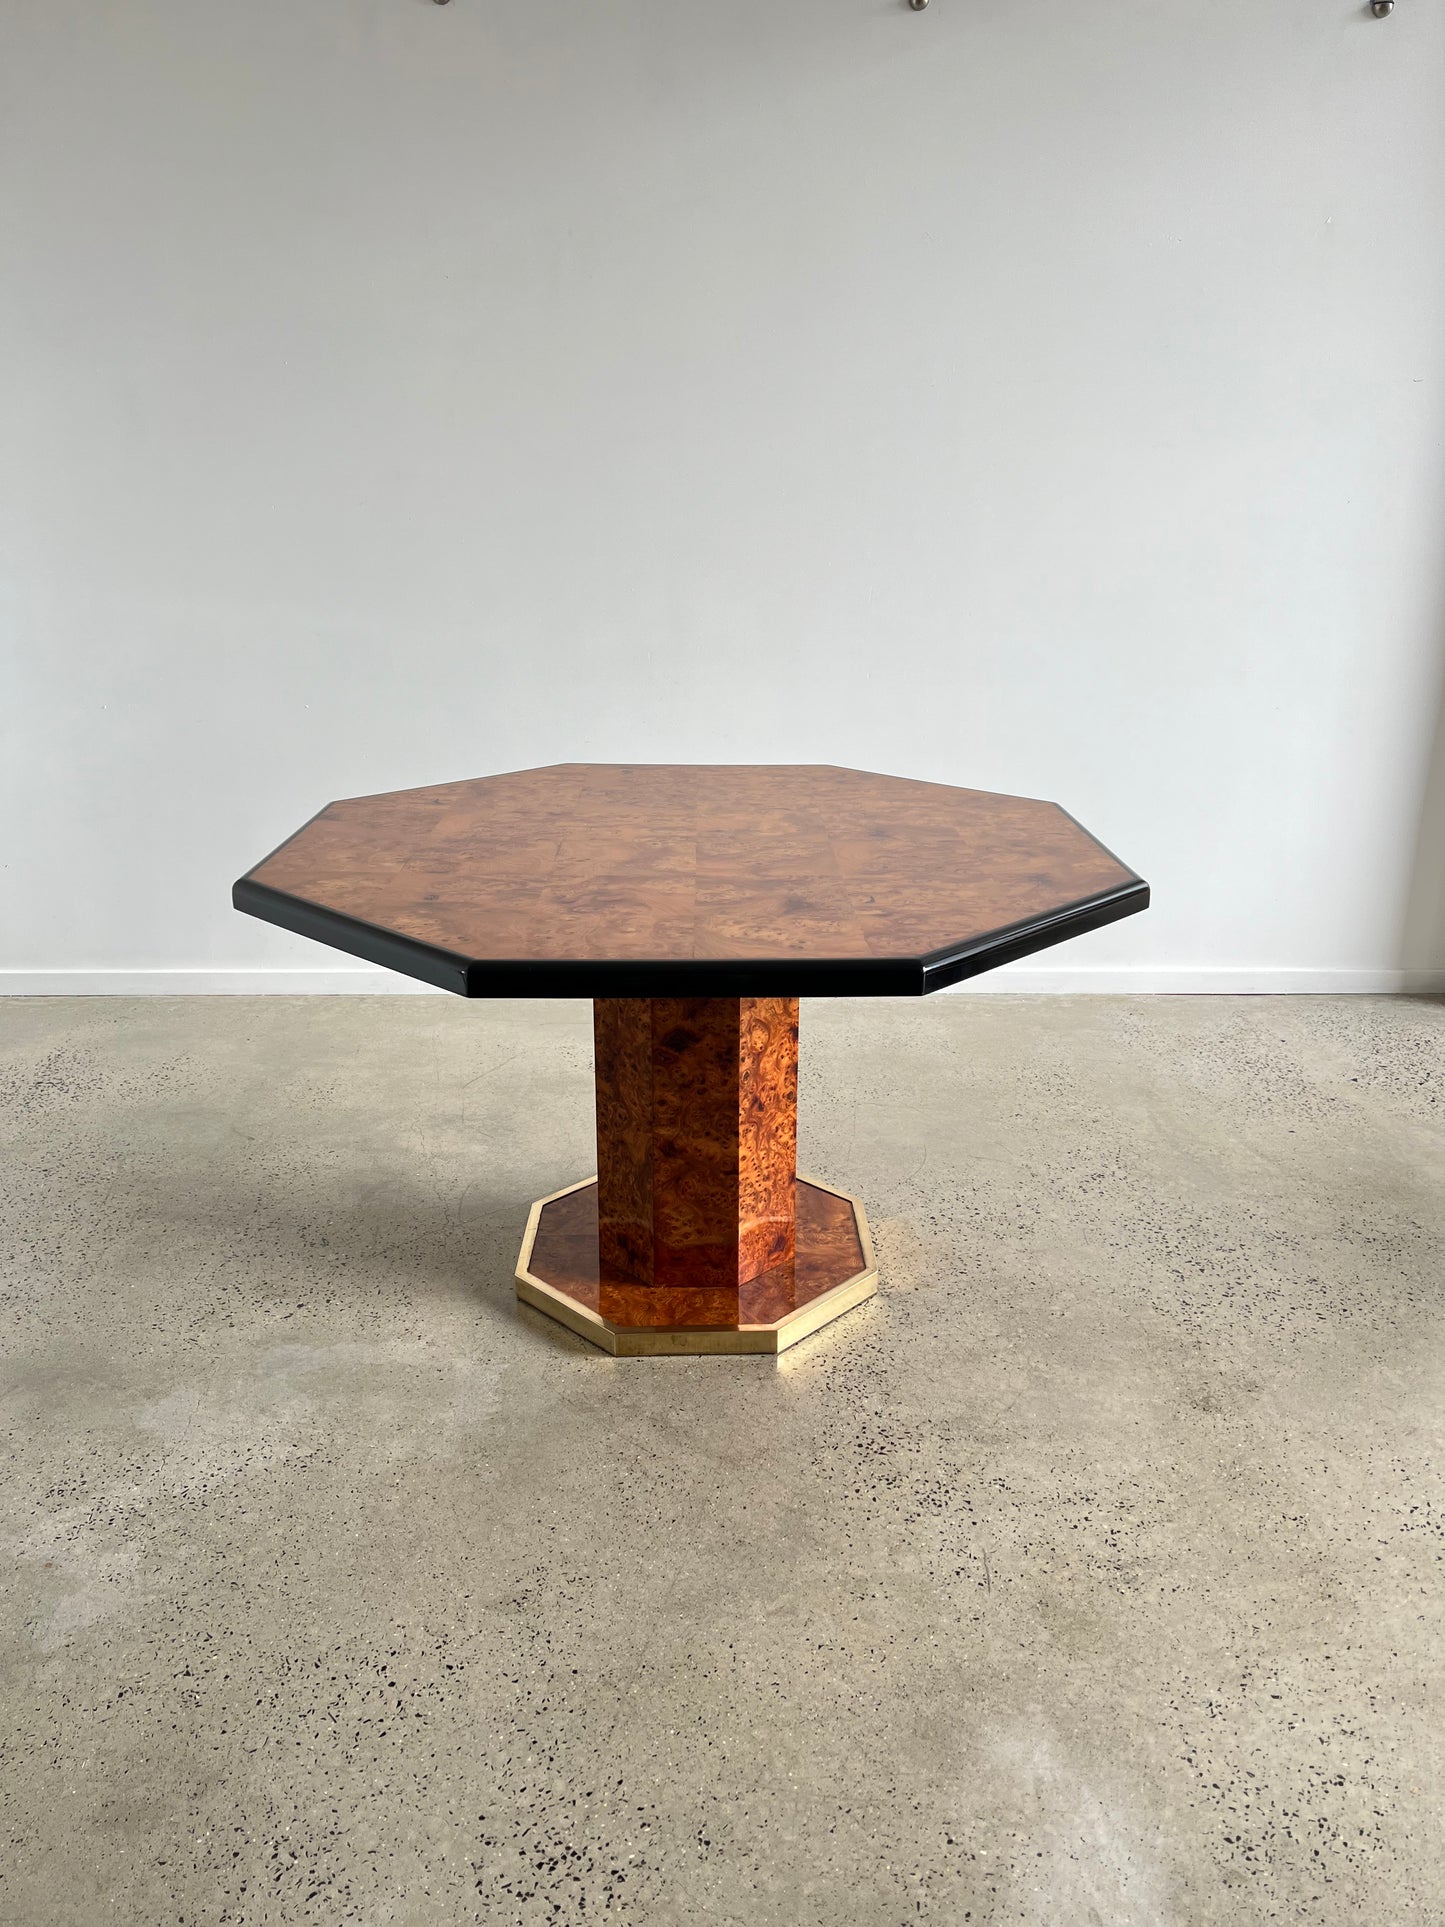 Willy Rizzo for Mario Sabot Pedestal Octagonal Dining Table in Brass and Burlwood, 1970s